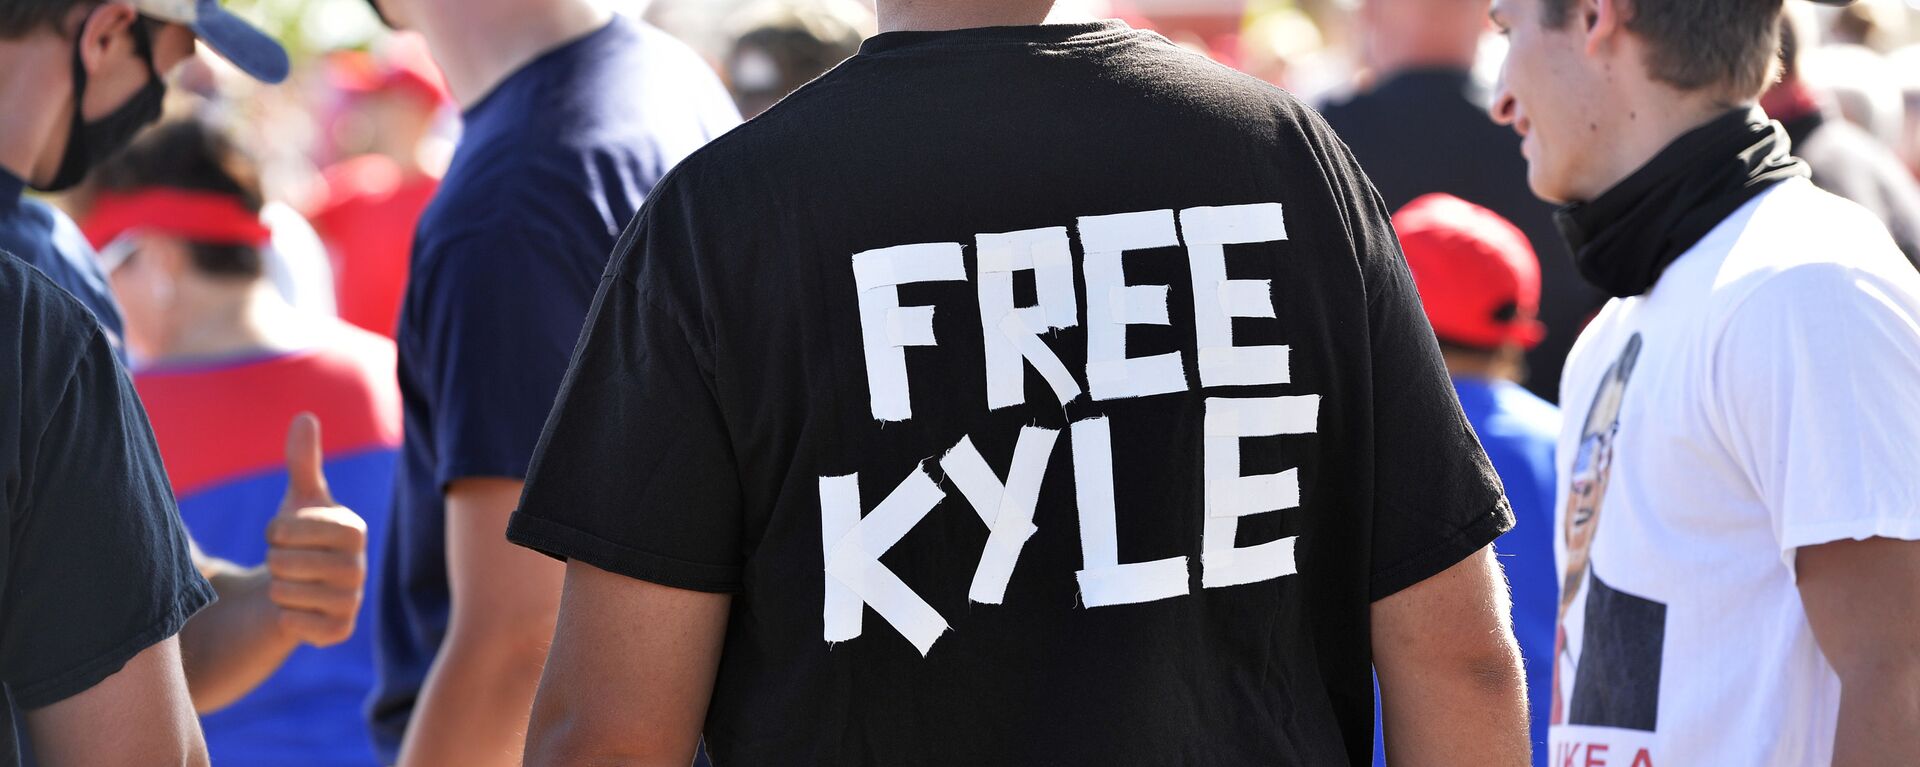 A man wears a shirt calling for freedom for Kyle Rittenhouse, 17, the man who allegedly shot protesters in Wisconsin, during a US President Donald Trump Campaign Rally, the day after the end of the Republican National Convention, at Manchester airport in Londonderry, New Hampshire on August 28, 2020 - Sputnik International, 1920, 04.09.2020